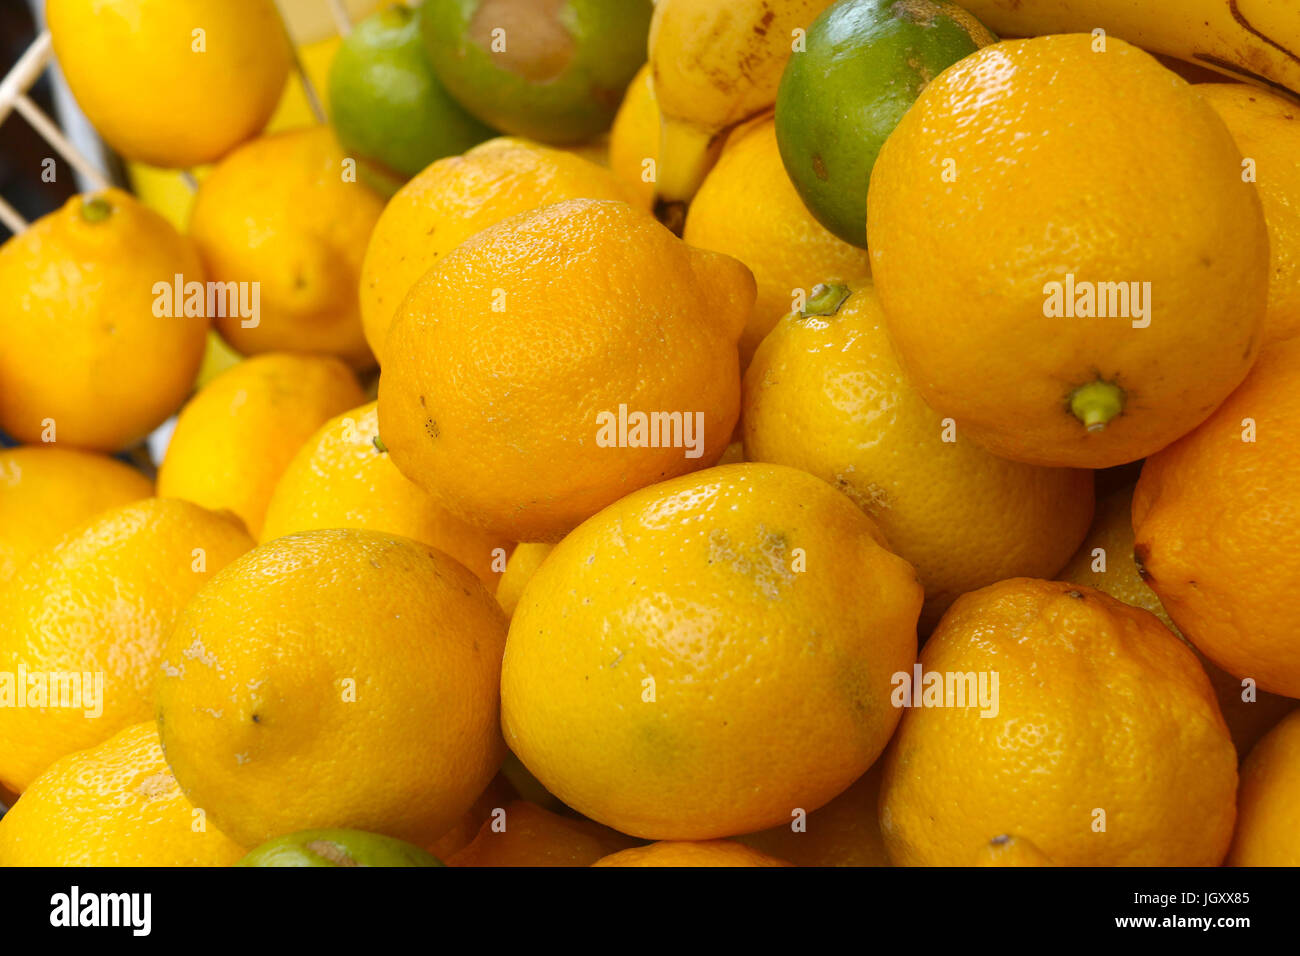 Yellow lemons and green limes in a basket Stock Photo